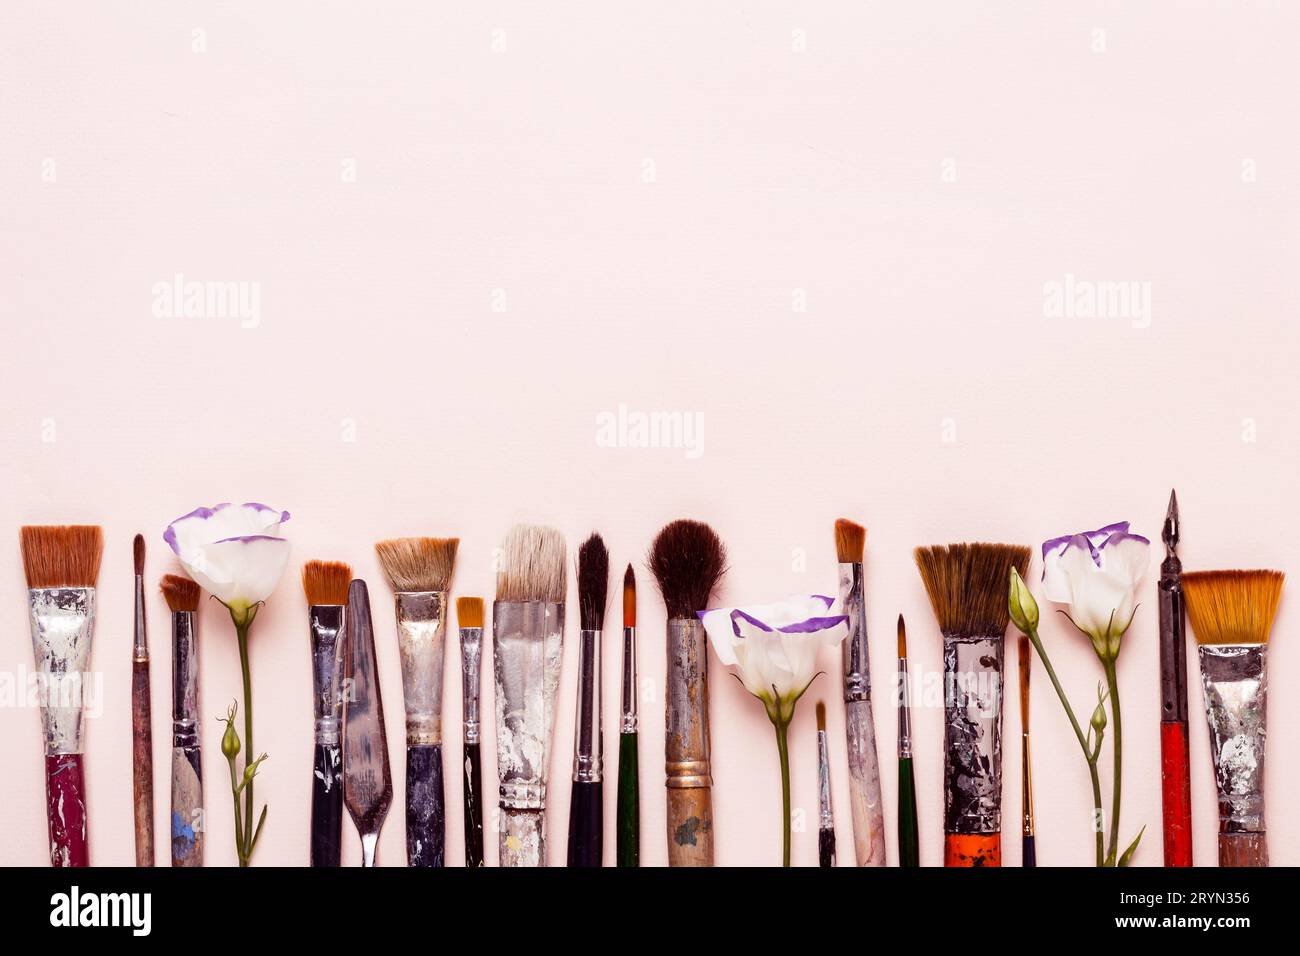 Art Creativity pink background. Row of different brushes and flowers Stock Photo